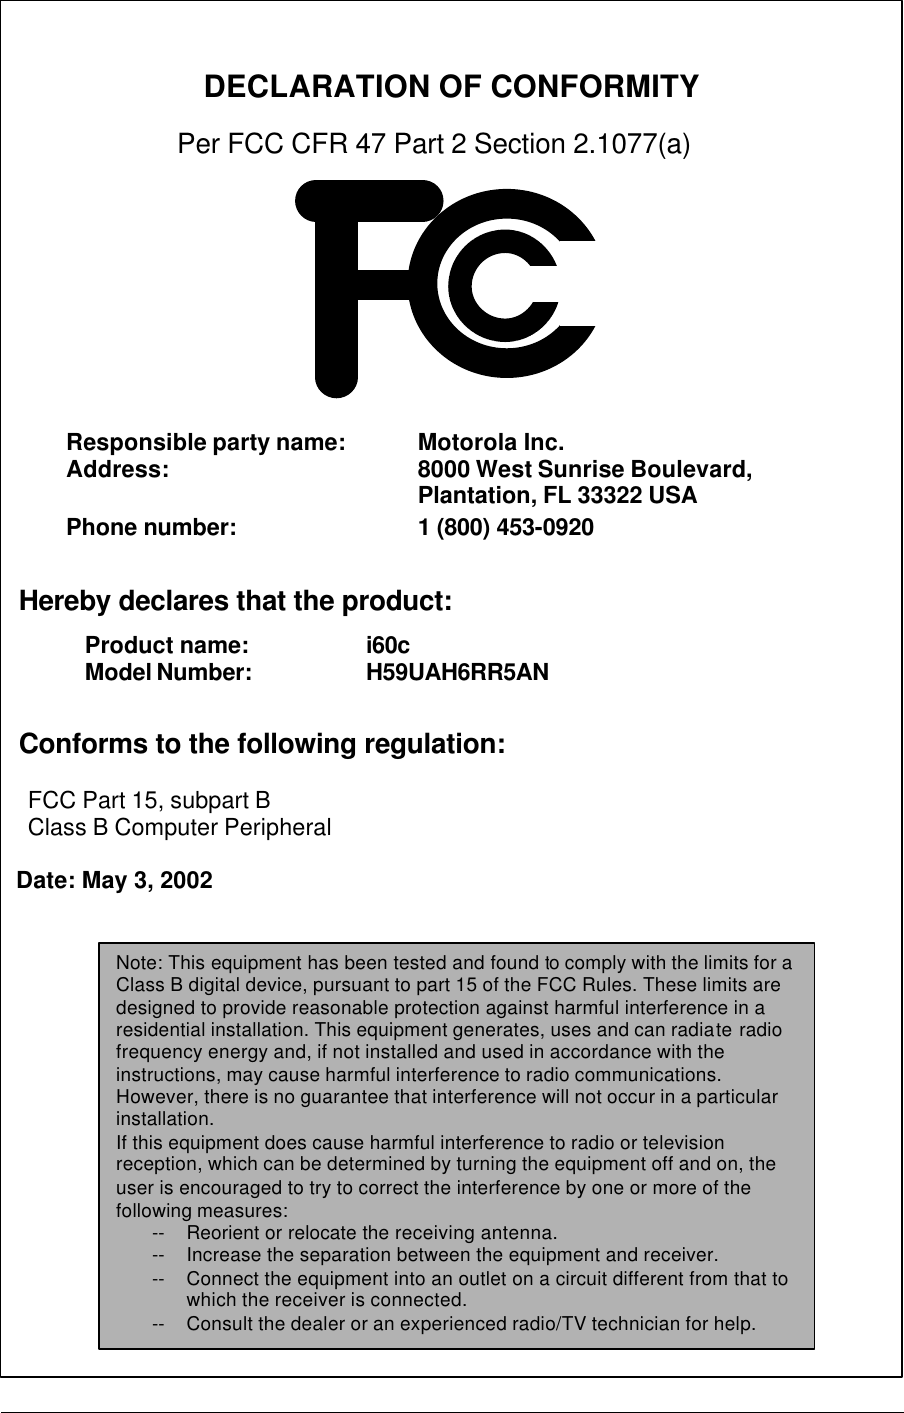           DECLARATION OF CONFORMITY   Per FCC CFR 47 Part 2 Section 2.1077(a)                 Hereby declares that the product:        Conforms to the following regulation:      FCC Part 15, subpart B     Class B Computer Peripheral    Date: May 3, 2002  Responsible party name:  Motorola Inc. Address: 8000 West Sunrise Boulevard, Plantation, FL 33322 USA    Phone number: 1 (800) 453-0920 Product name:   i60c Model Number:      H59UAH6RR5AN   Note: This equipment has been tested and found to comply with the limits for a Class B digital device, pursuant to part 15 of the FCC Rules. These limits are designed to provide reasonable protection against harmful interference in a residential installation. This equipment generates, uses and can radiate radio frequency energy and, if not installed and used in accordance with the instructions, may cause harmful interference to radio communications. However, there is no guarantee that interference will not occur in a particular installation. If this equipment does cause harmful interference to radio or television reception, which can be determined by turning the equipment off and on, the user is encouraged to try to correct the interference by one or more of the following measures: -- Reorient or relocate the receiving antenna. -- Increase the separation between the equipment and receiver. -- Connect the equipment into an outlet on a circuit different from that to which the receiver is connected. -- Consult the dealer or an experienced radio/TV technician for help. 